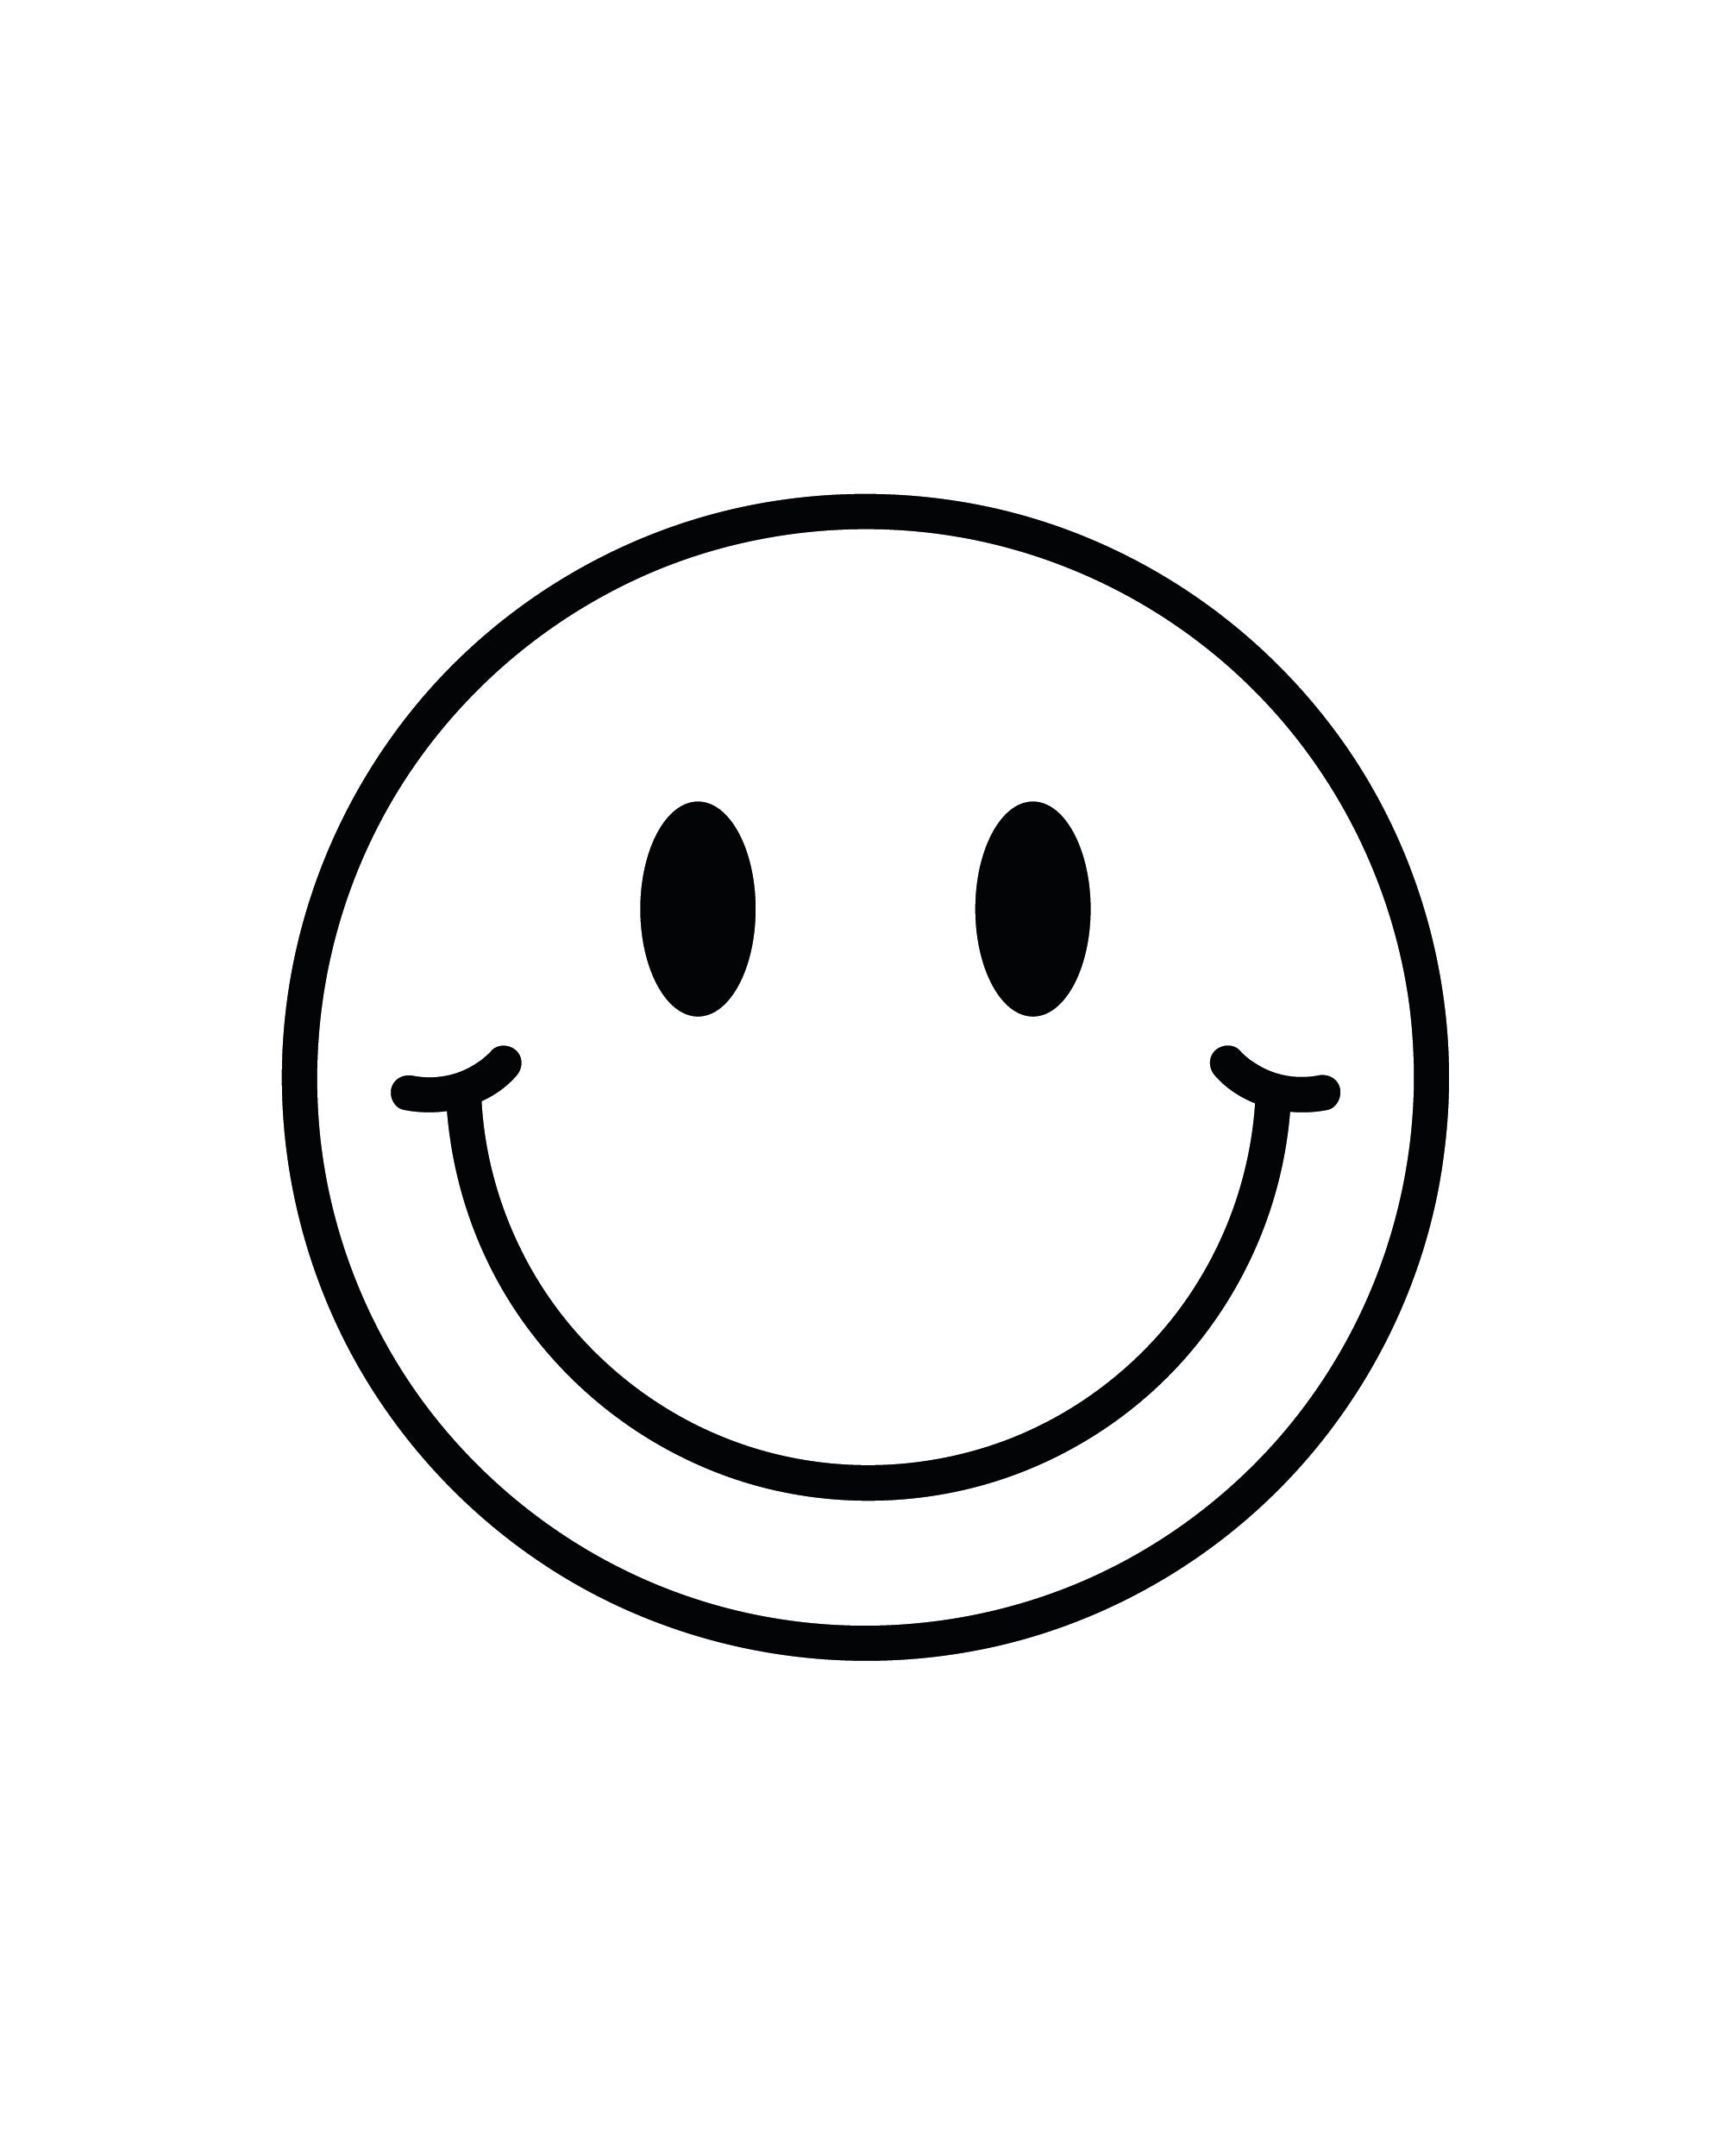 File:718smiley.svg - Wikimedia Commons